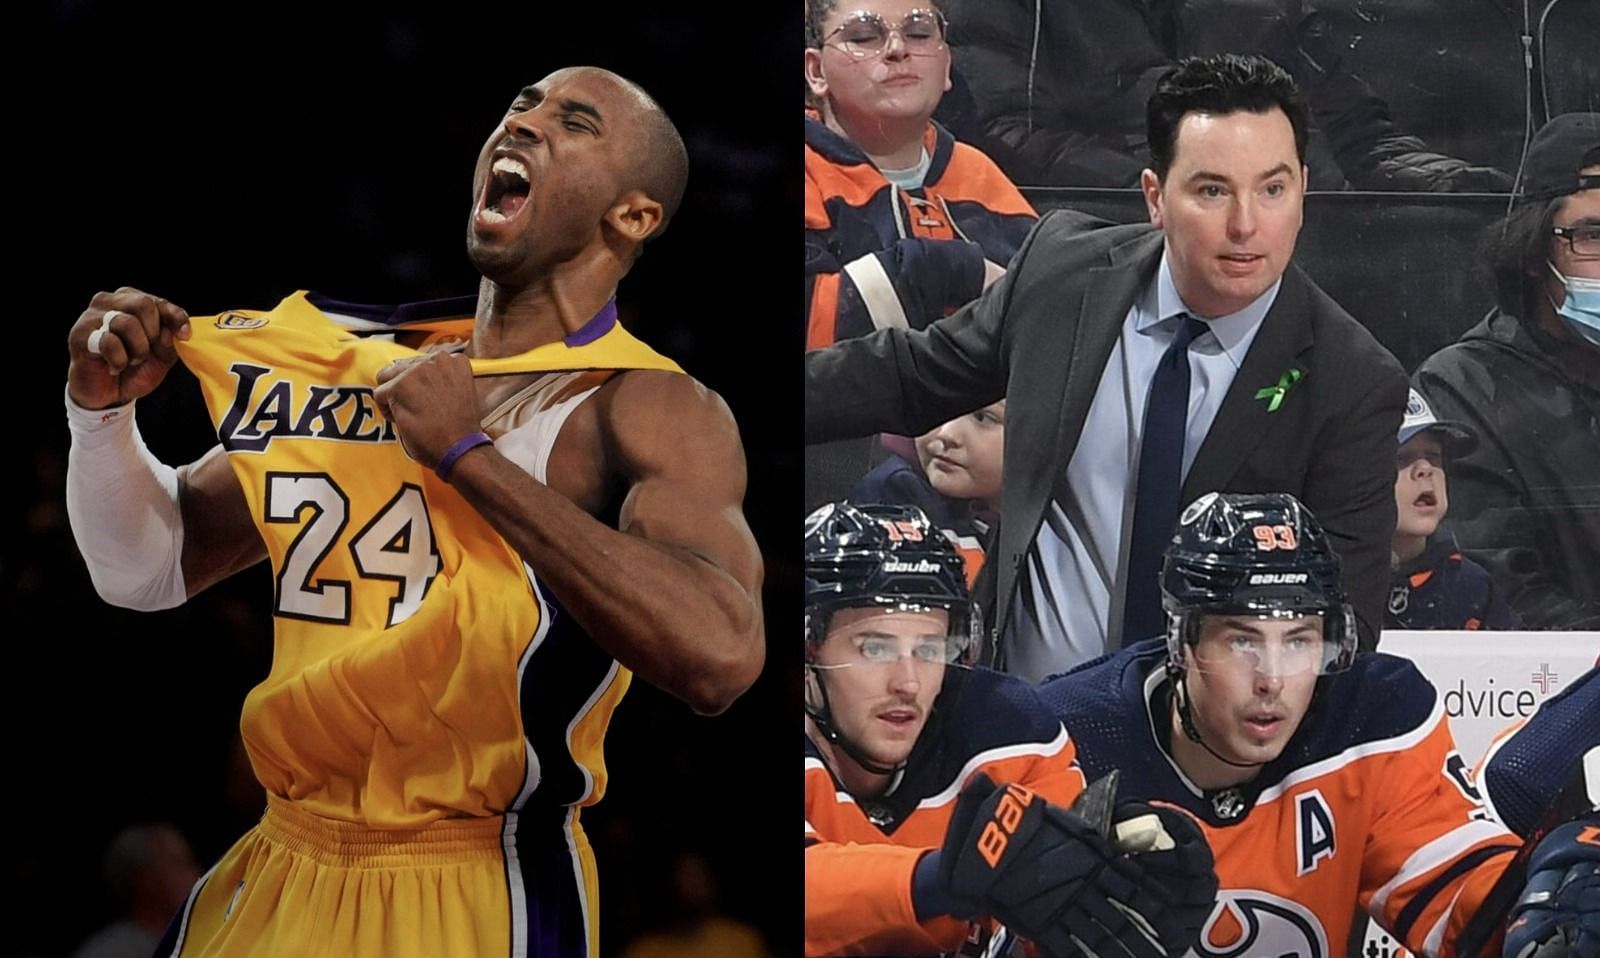 Edmonton Oilers HC Jay Woodcroft reveals how he takes inspiration from Kobe Bryant to push his players